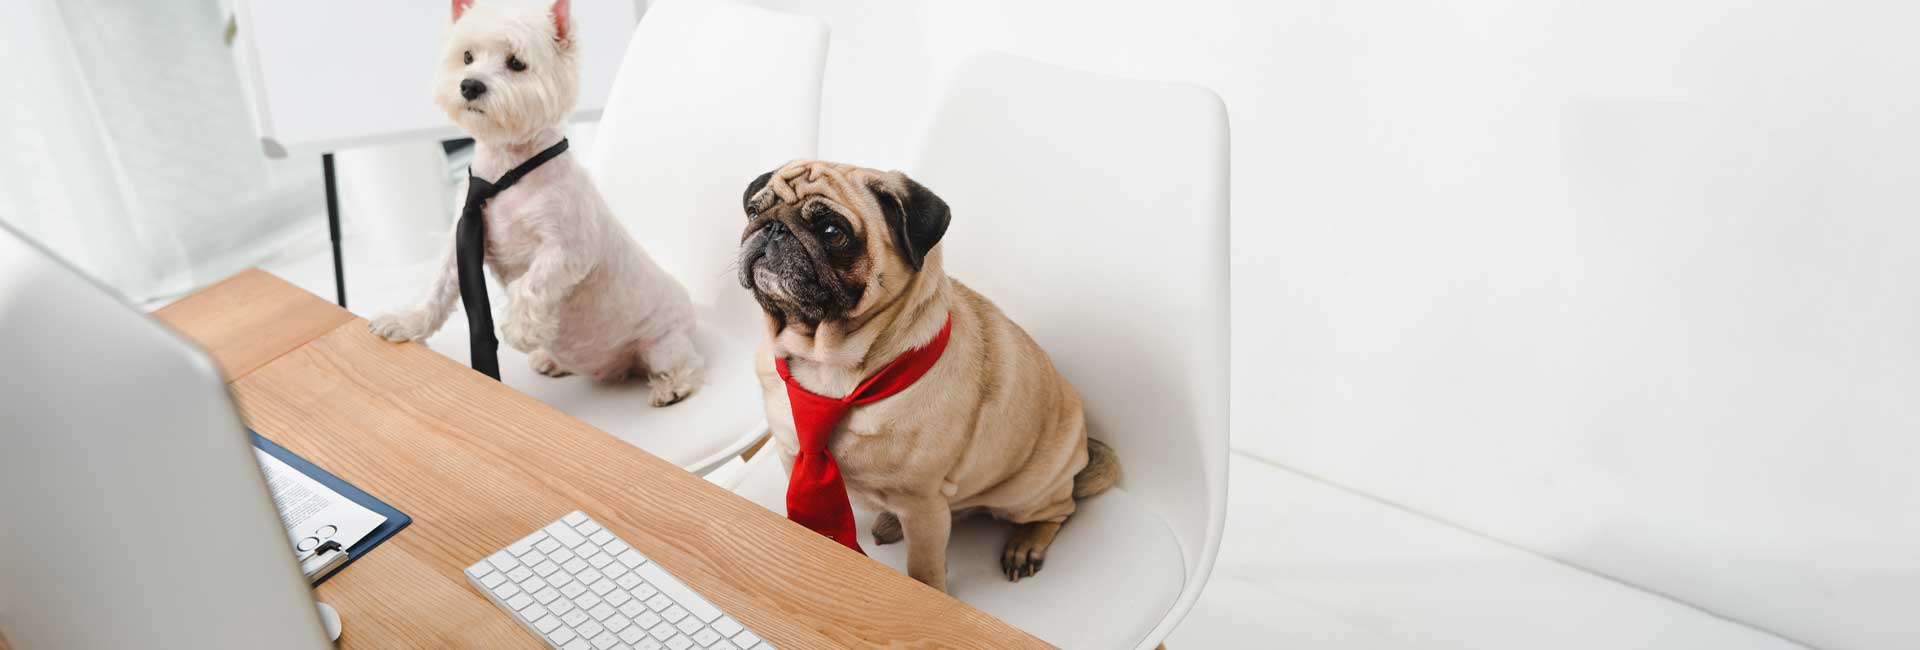 Two funny dogs sitting on chairs in front of computers